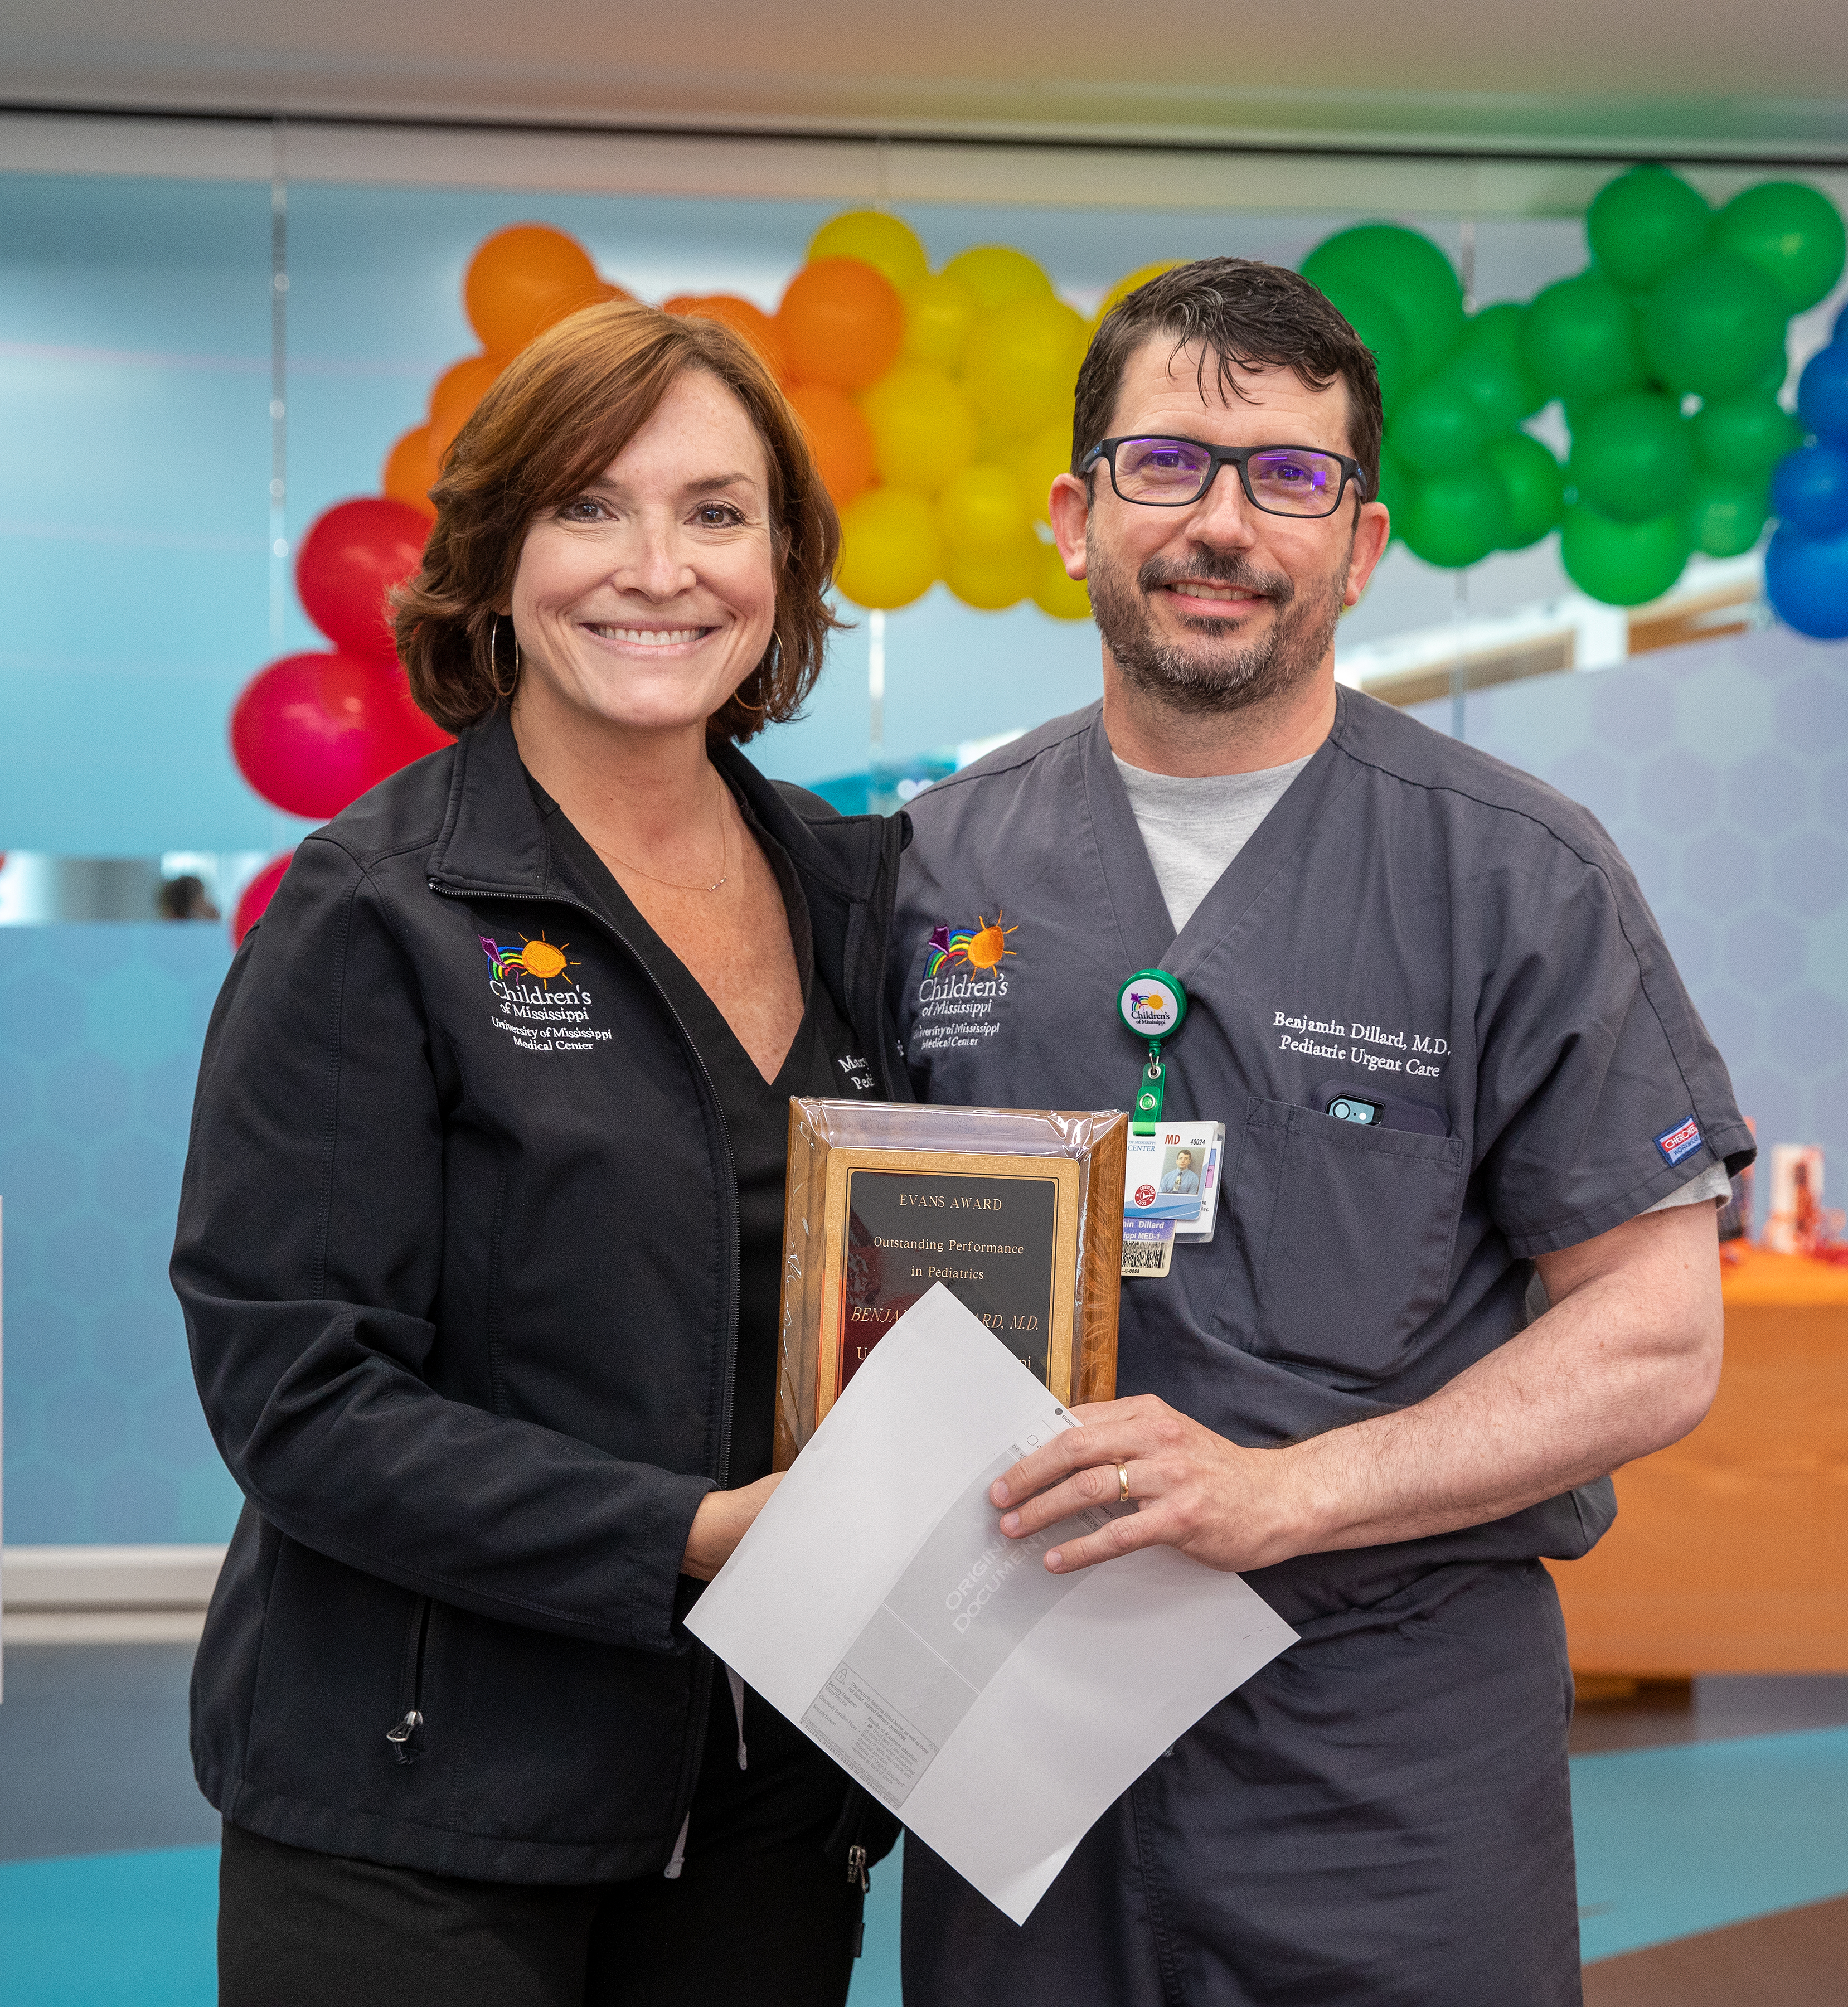 Dr. Mary Taylor presents Dr. Benji Dillard, division director of general pediatrics and pediatric urgent care, with the Evans Award for Outstanding Performance in Pediatrics.